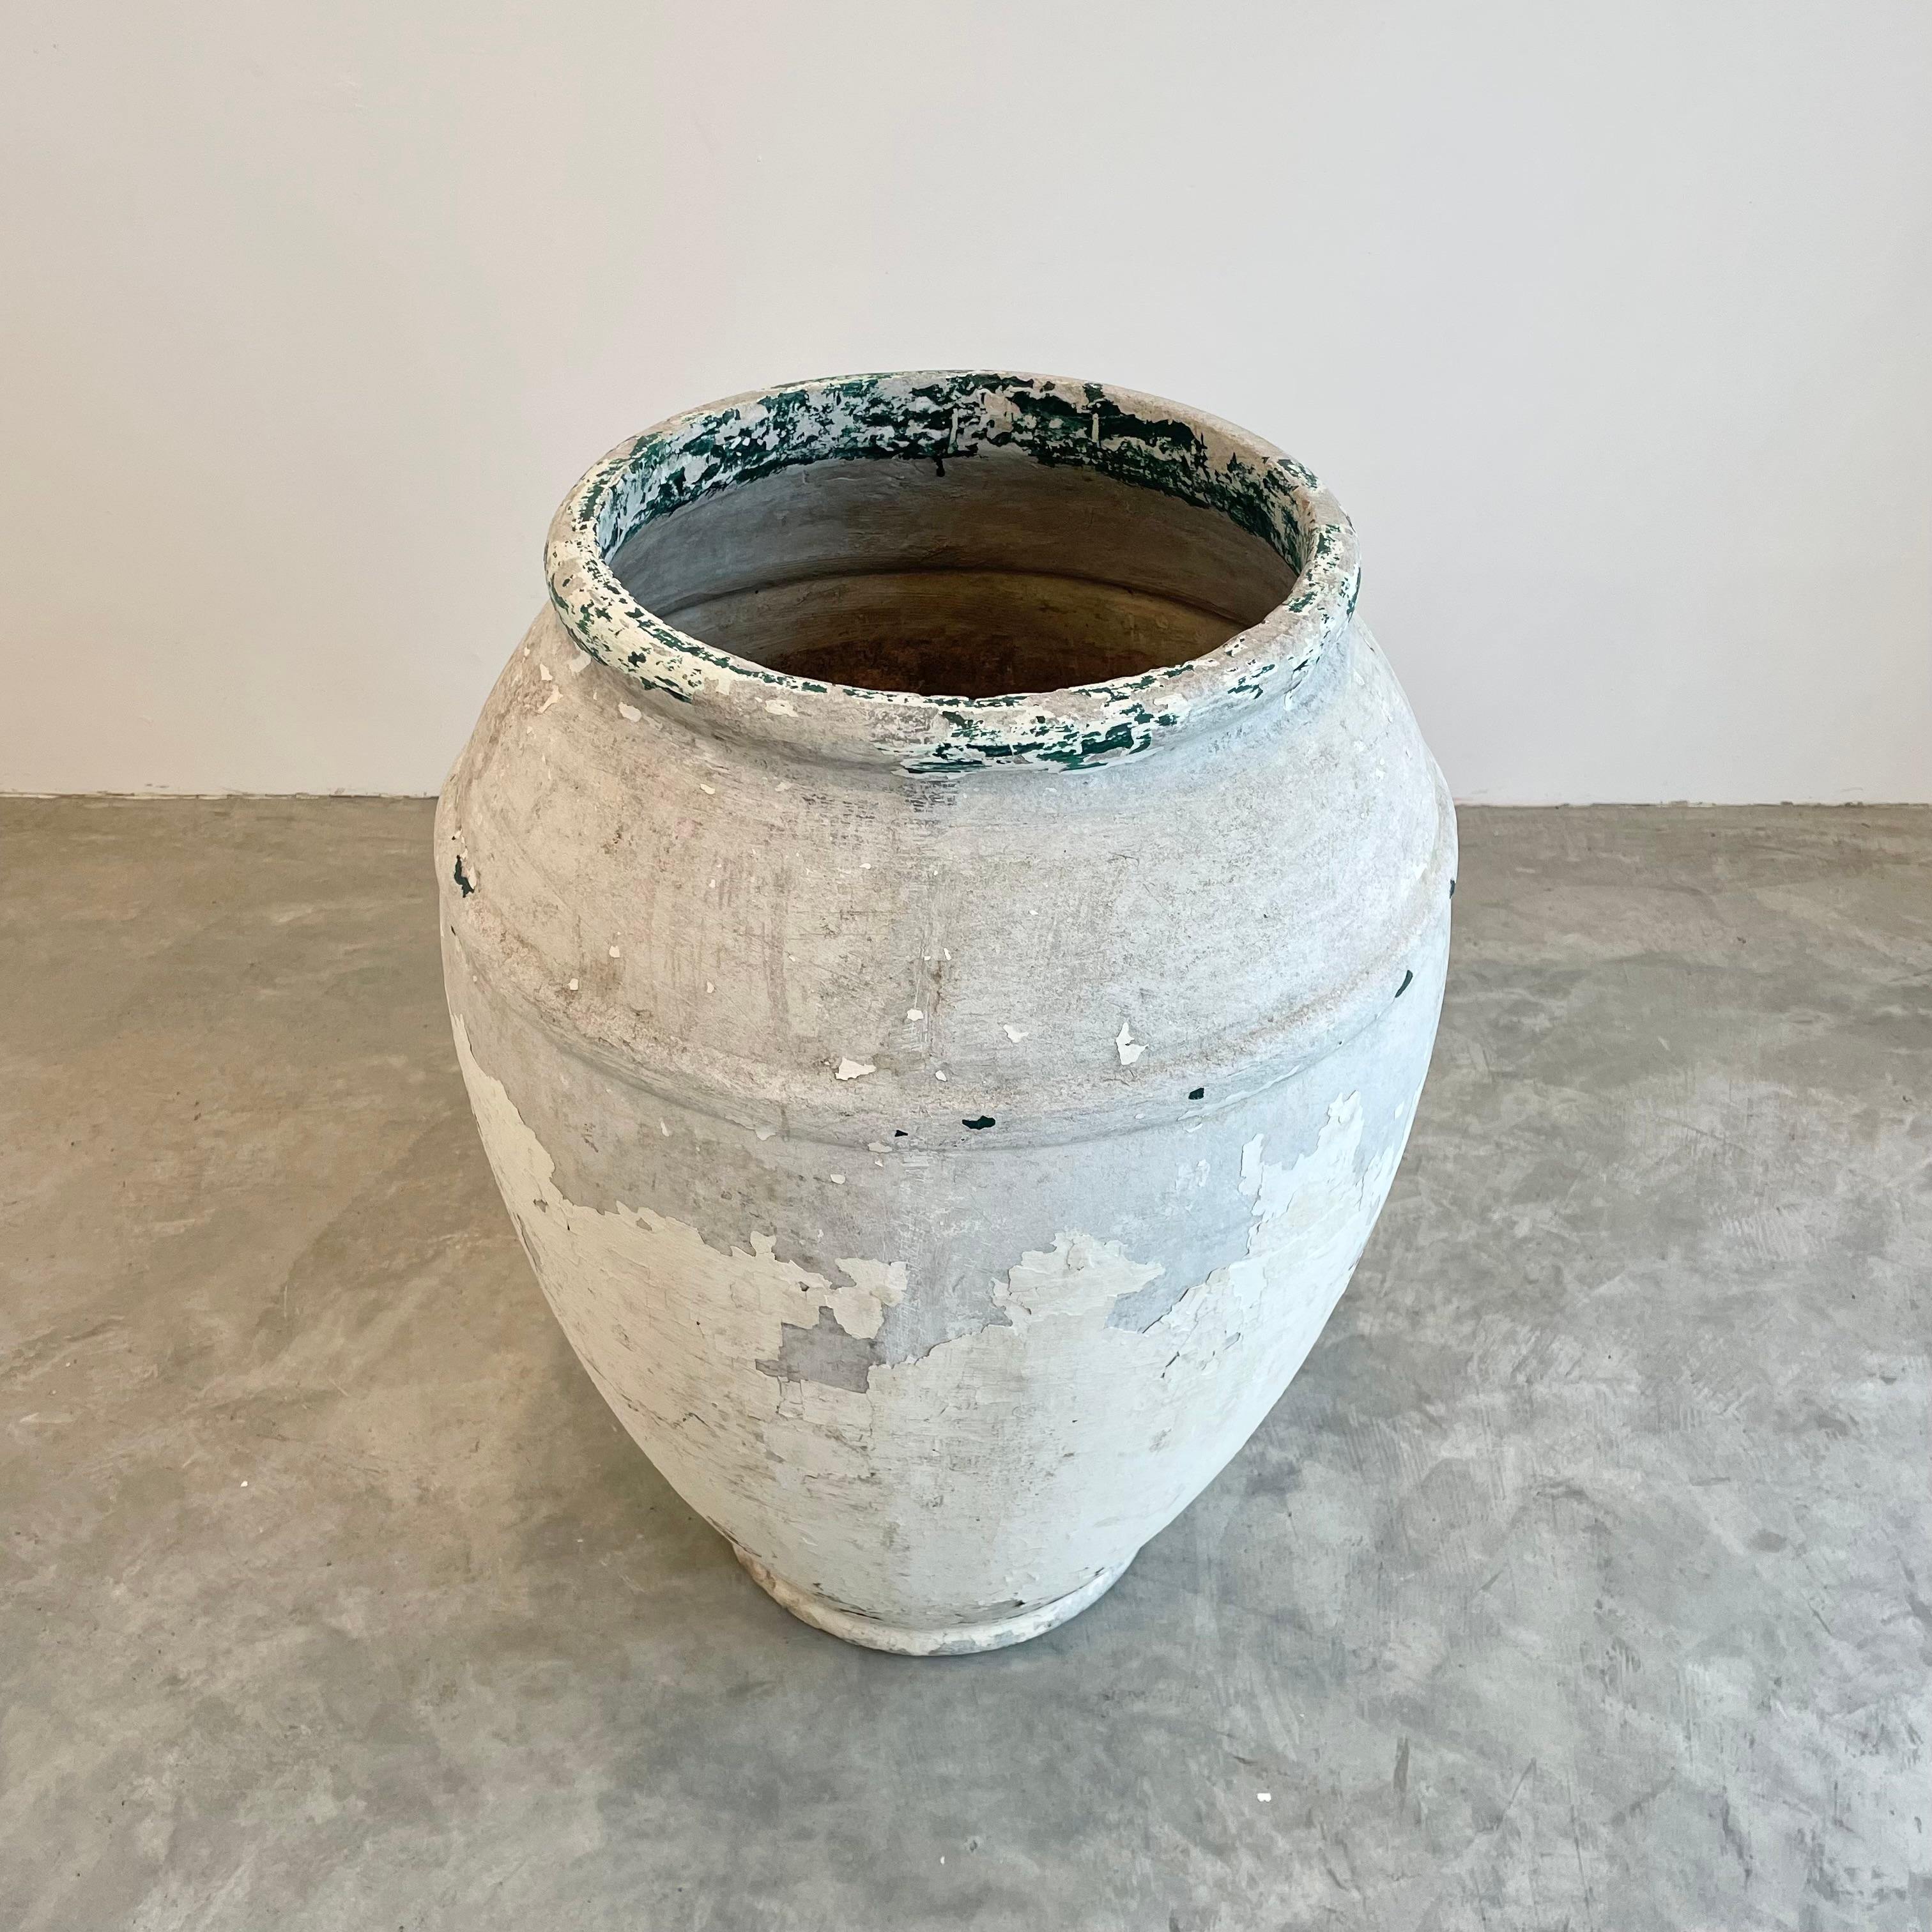 Unusual concrete urn by Willy Guhl. Rare model and size. Excellent white and green patina. Urn has a delicate cement ridge around the mouth as well as around the widest part of the jar giving it depth and delicate lines. The body of the jar tapers